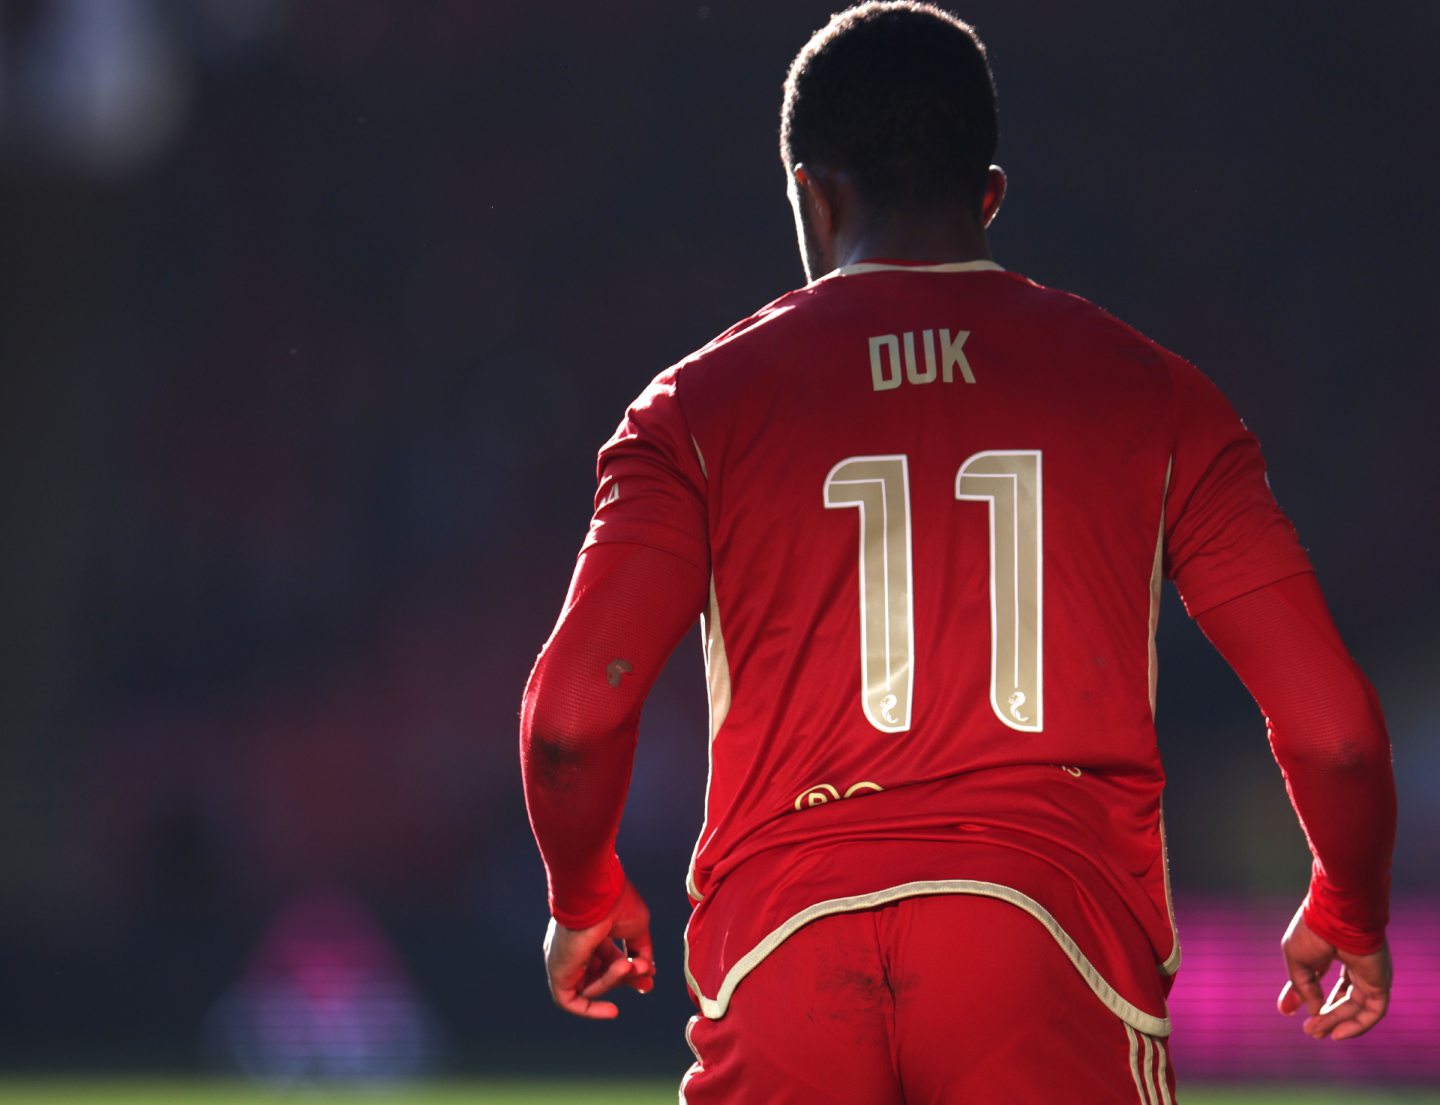 Aberdeen striker Duk in action during the 2-1 defeat of Ross County at Pittodrie. Image: Shutterstock